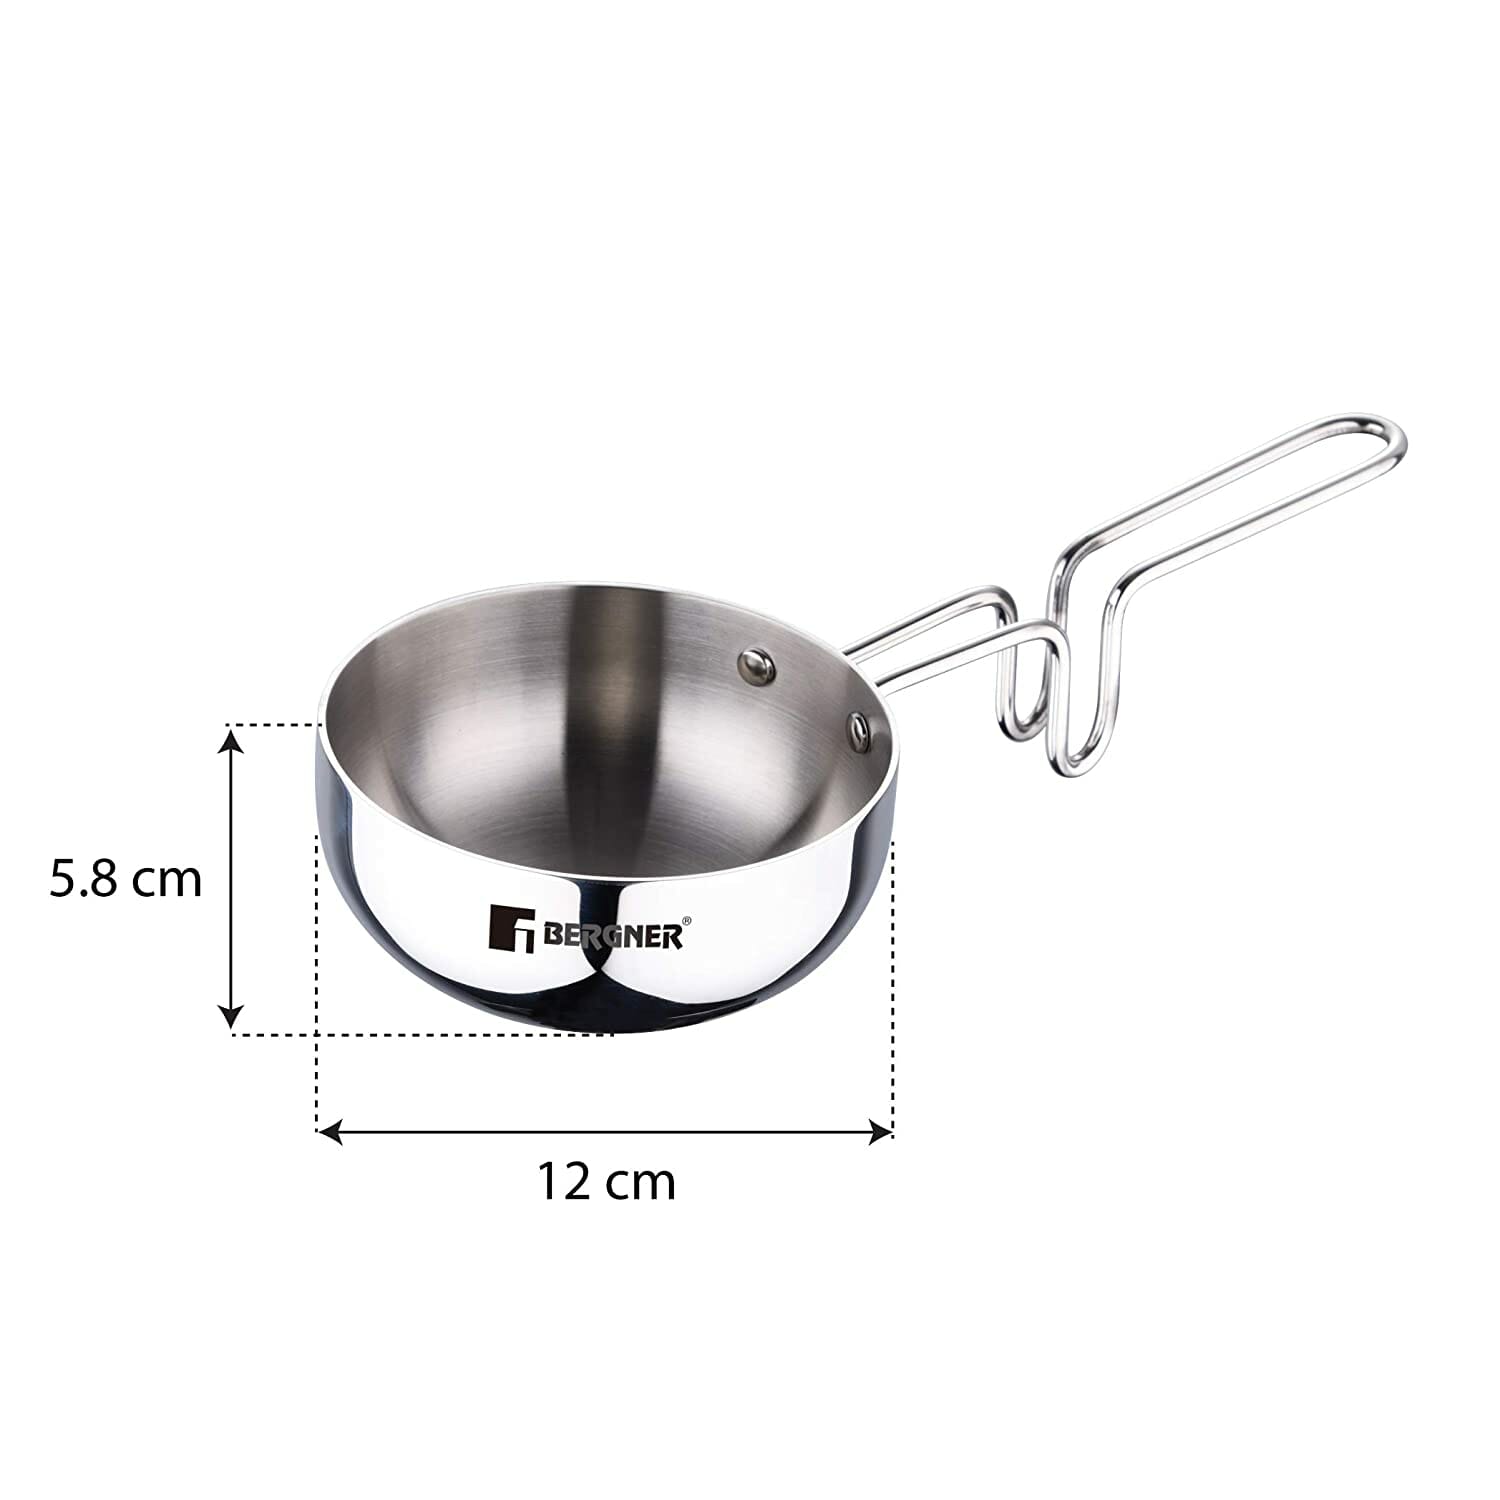 Bergner Tri-Ply Stainless Steel Silver – 12 cm Tadka Pan